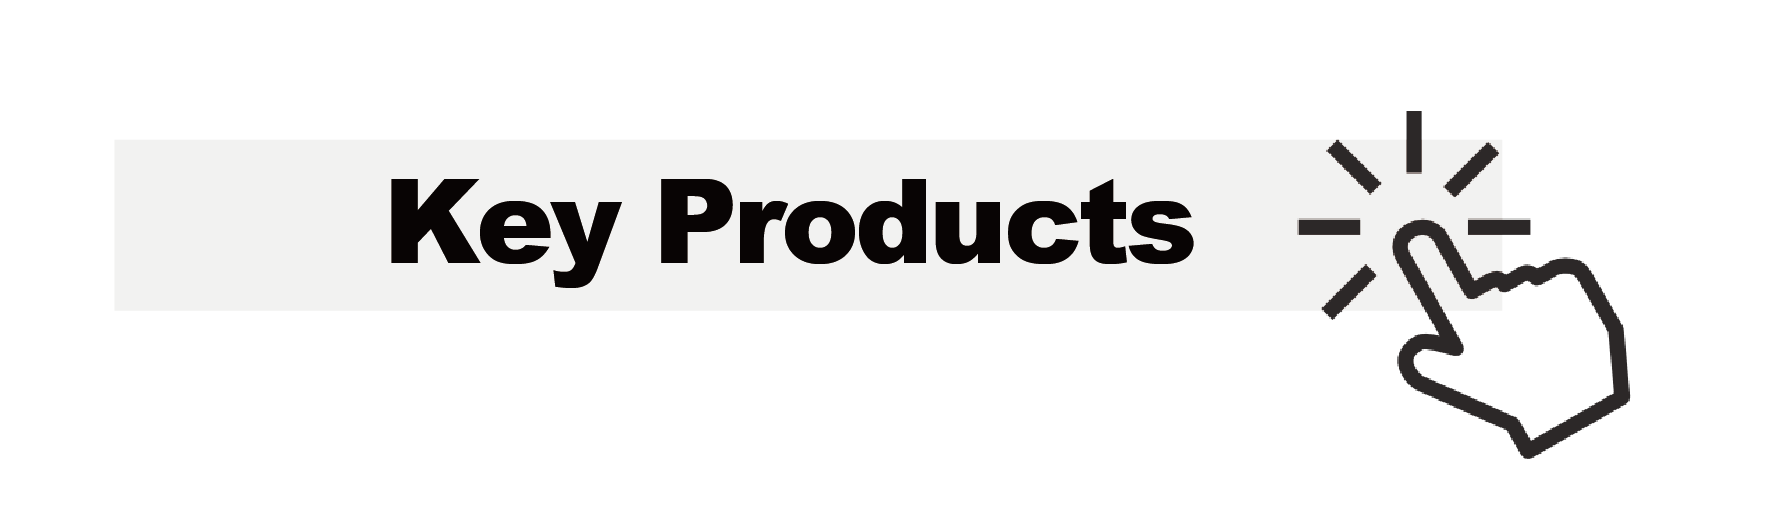 KEY PRODUCTS